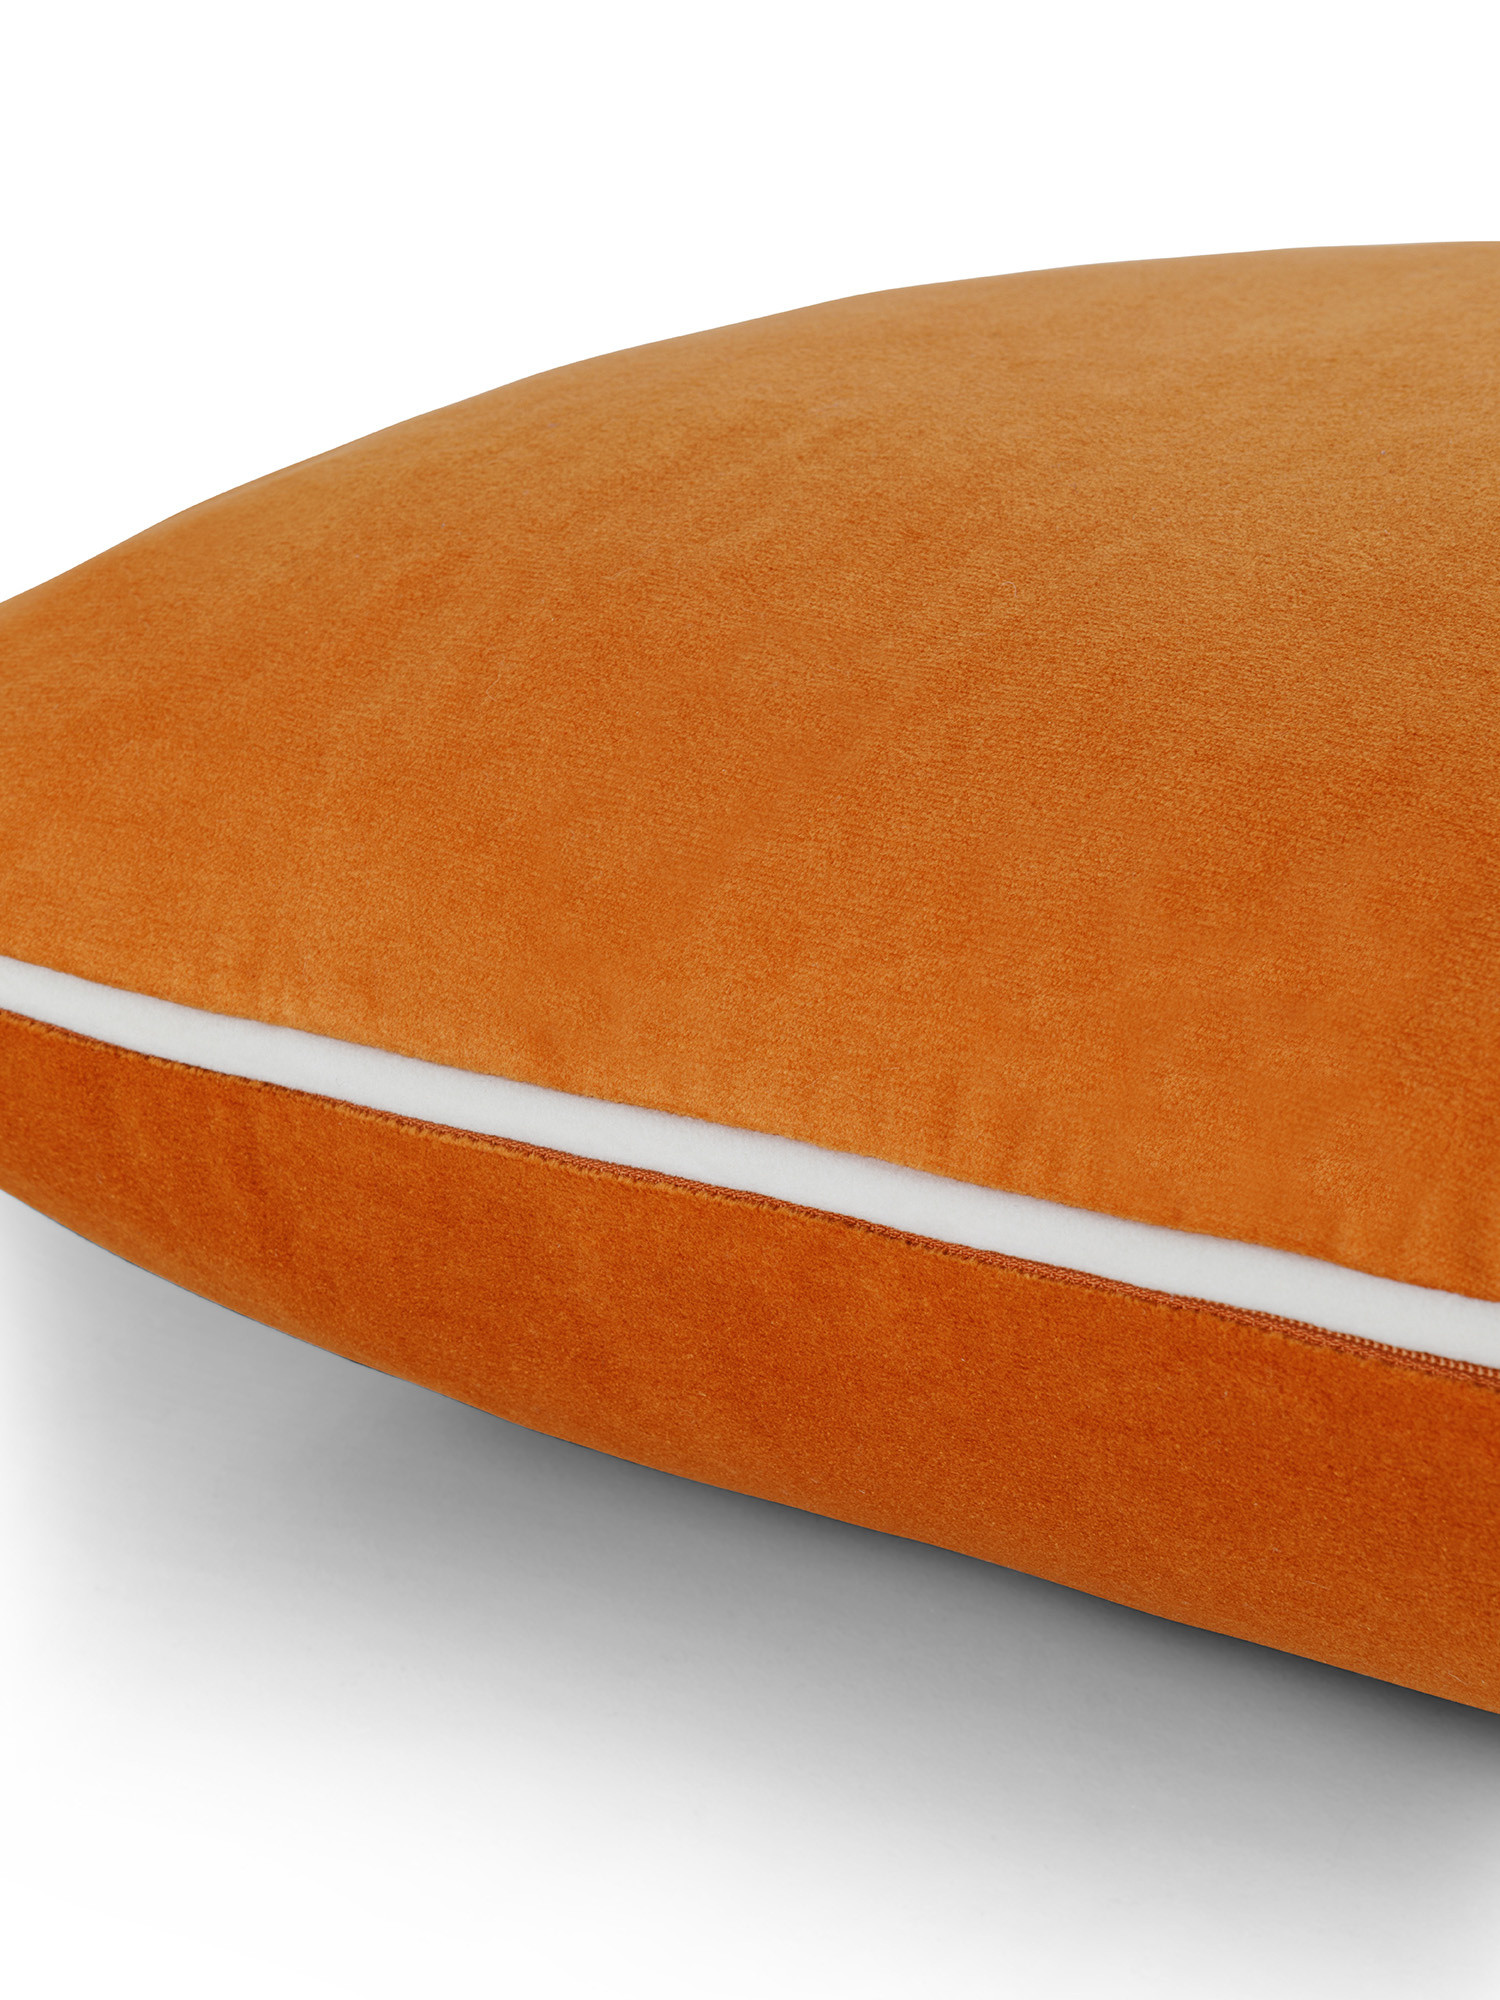 Velvet cushion with piping applied on the edge 45x45 cm, Orange, large image number 2